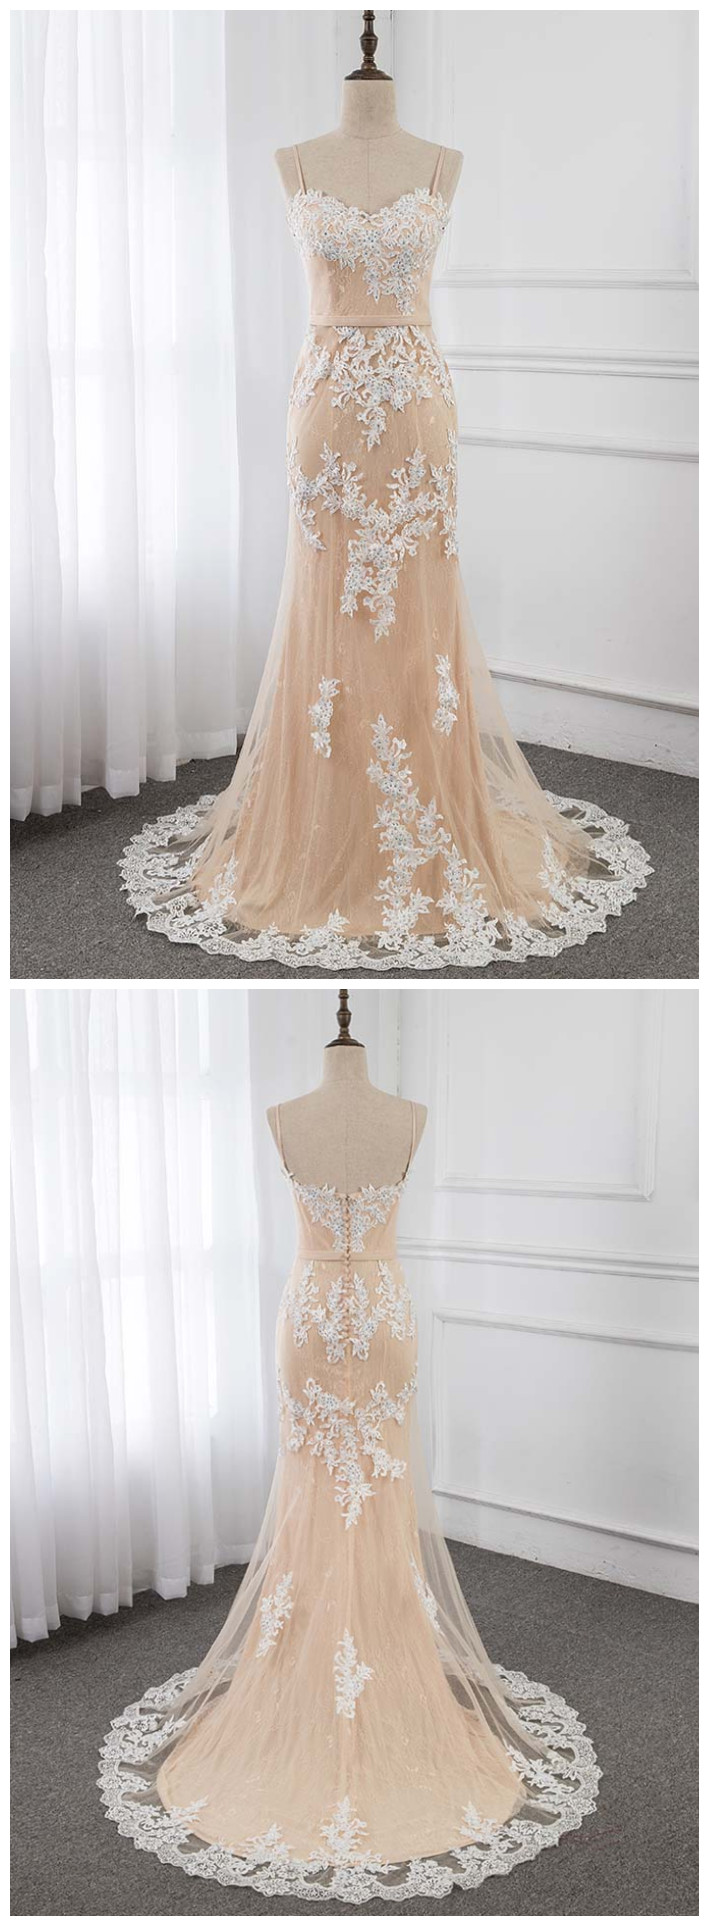 Fashion Lux Spaghetti Champagne Long Prom Dresses Lace Appliques Beaded Mermaid Formal Gowns